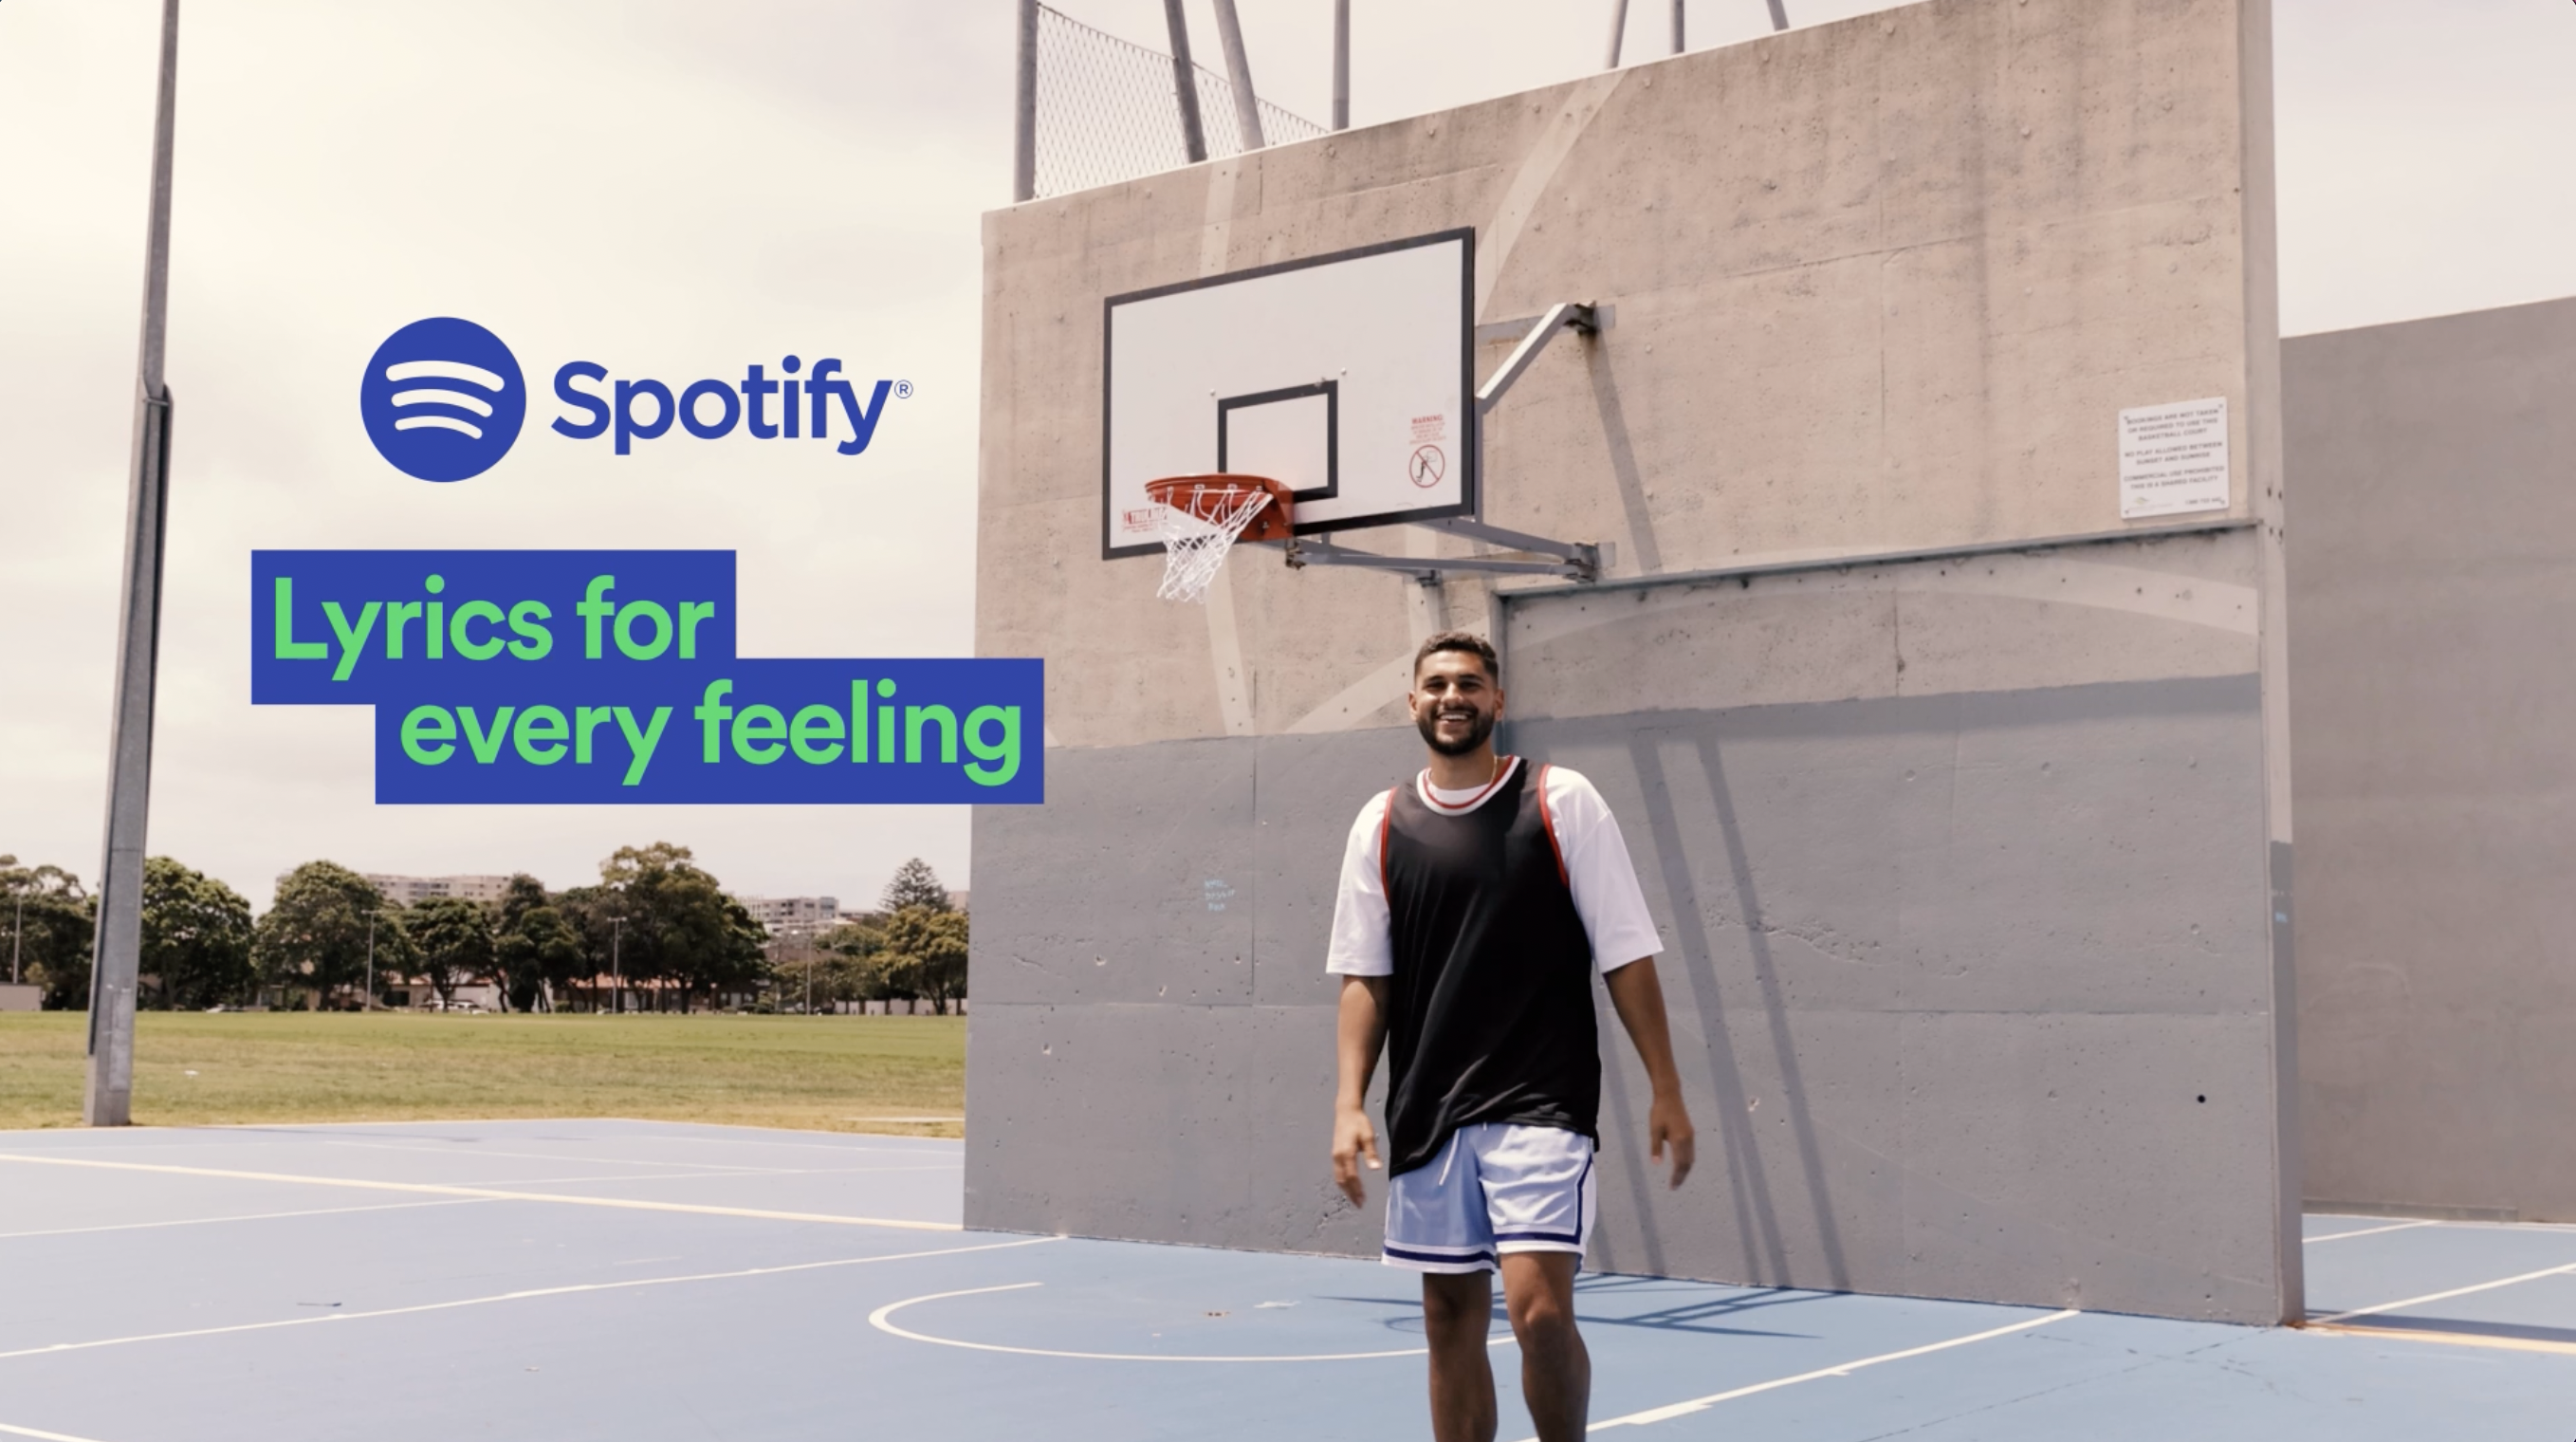 Benito Martin for Spotify, “Lyrics For Every Feeling”